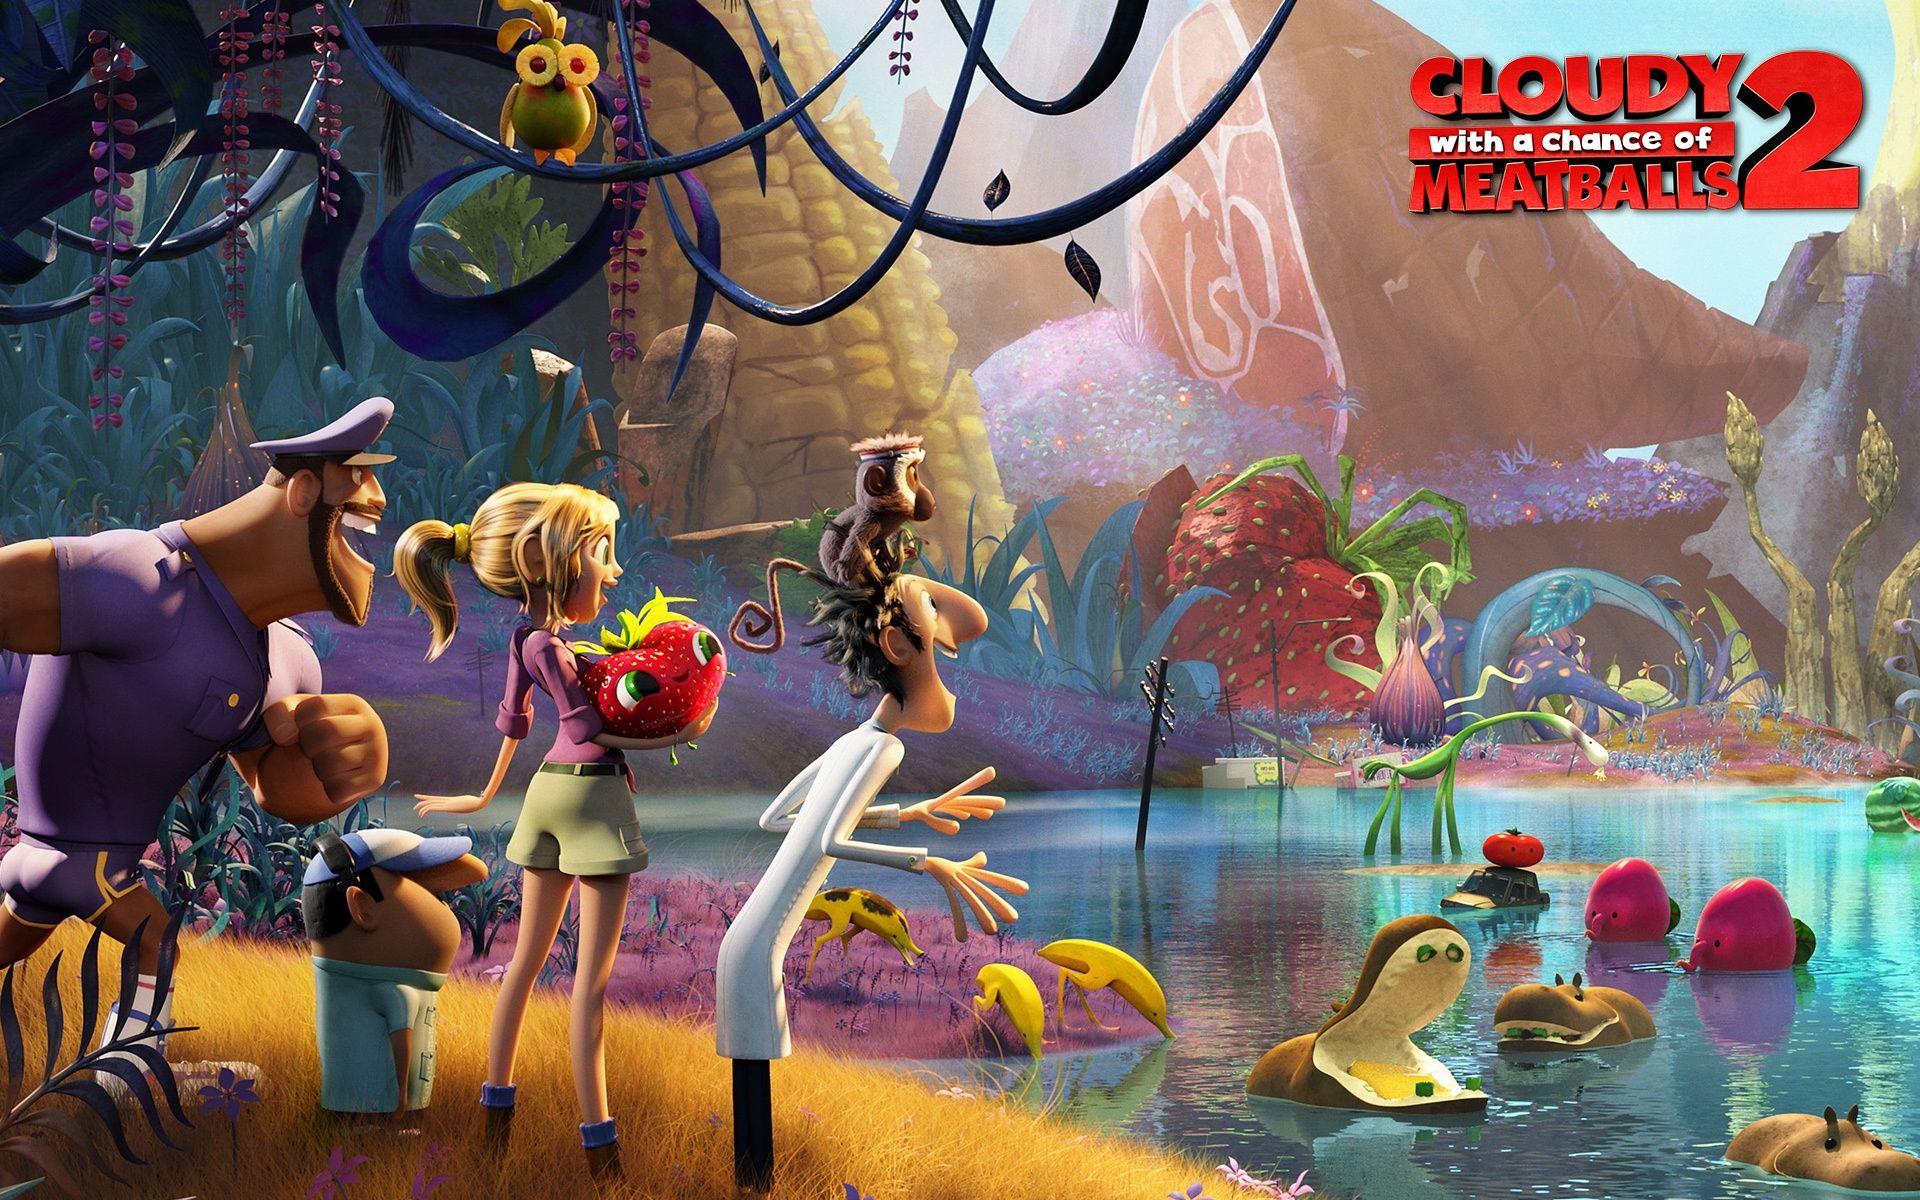 Cloudy with a Chance of Meatballs 2 Wallpaper in jpg format